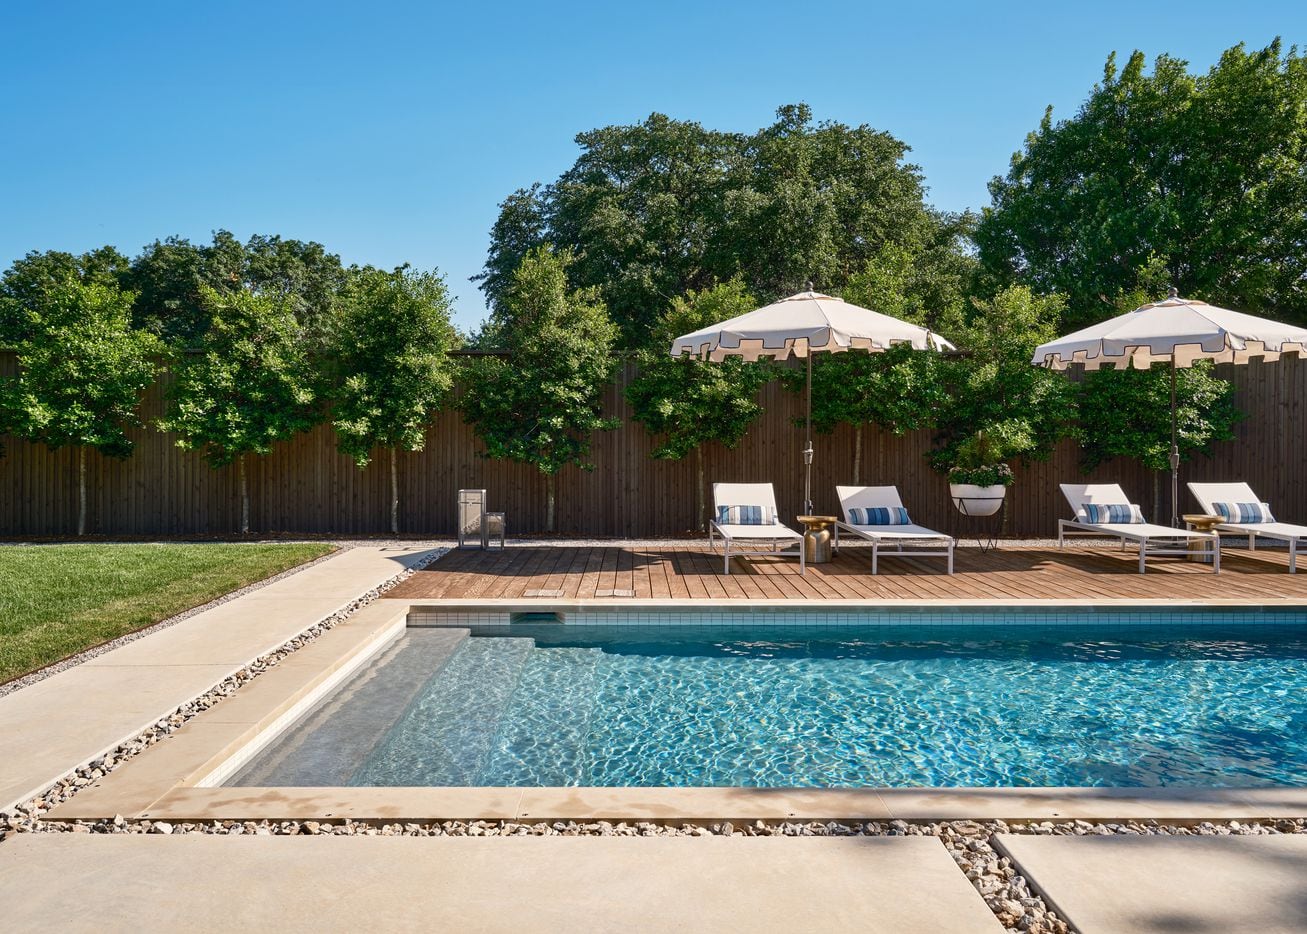 The backyard pool features loungers and umbrellas in a Palm Beach style.